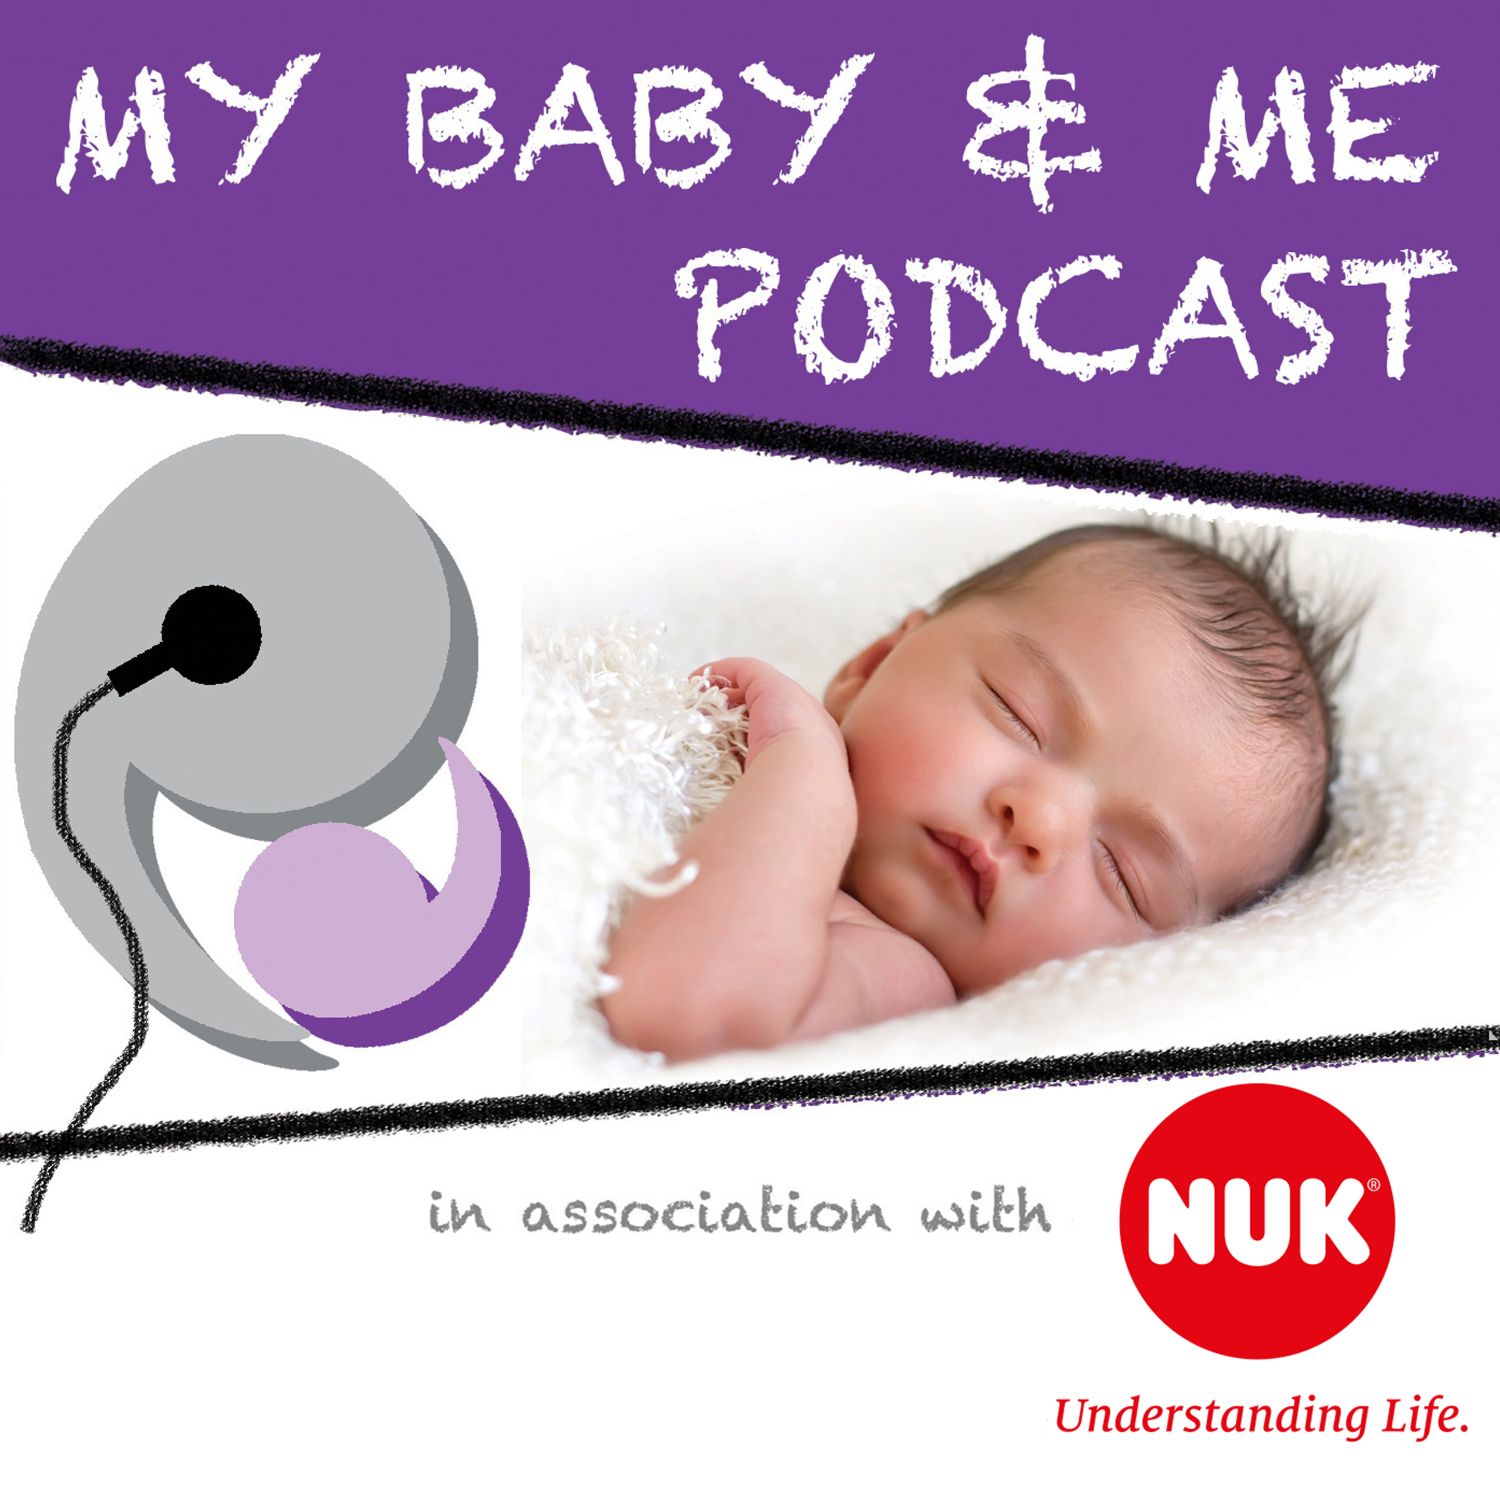 The My Baby and Me Podcast